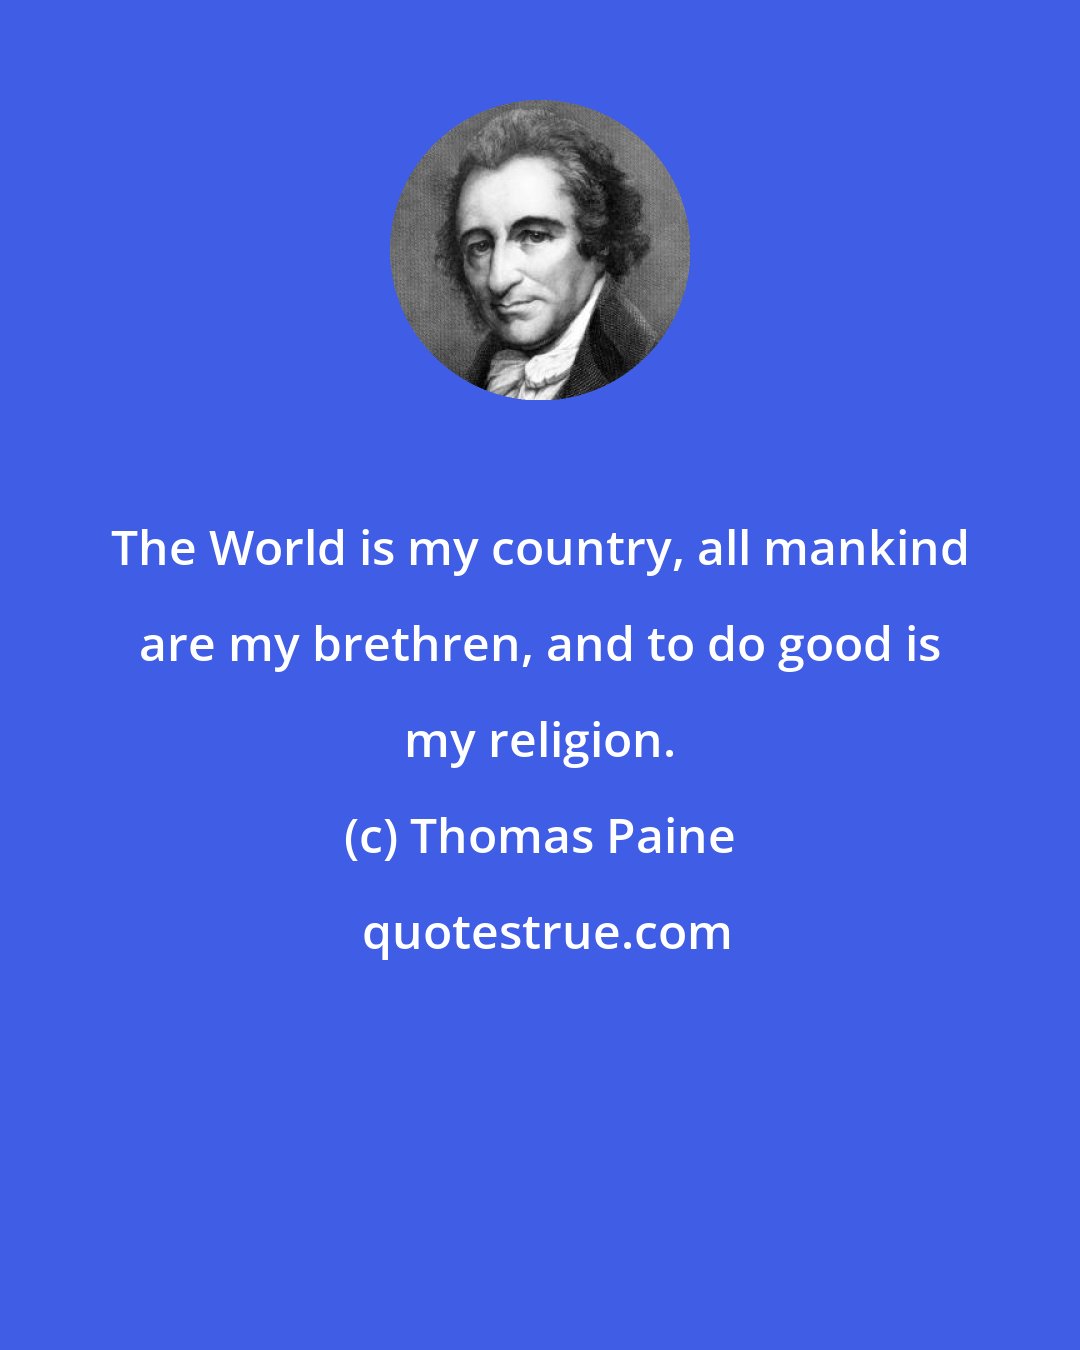 Thomas Paine: The World is my country, all mankind are my brethren, and to do good is my religion.